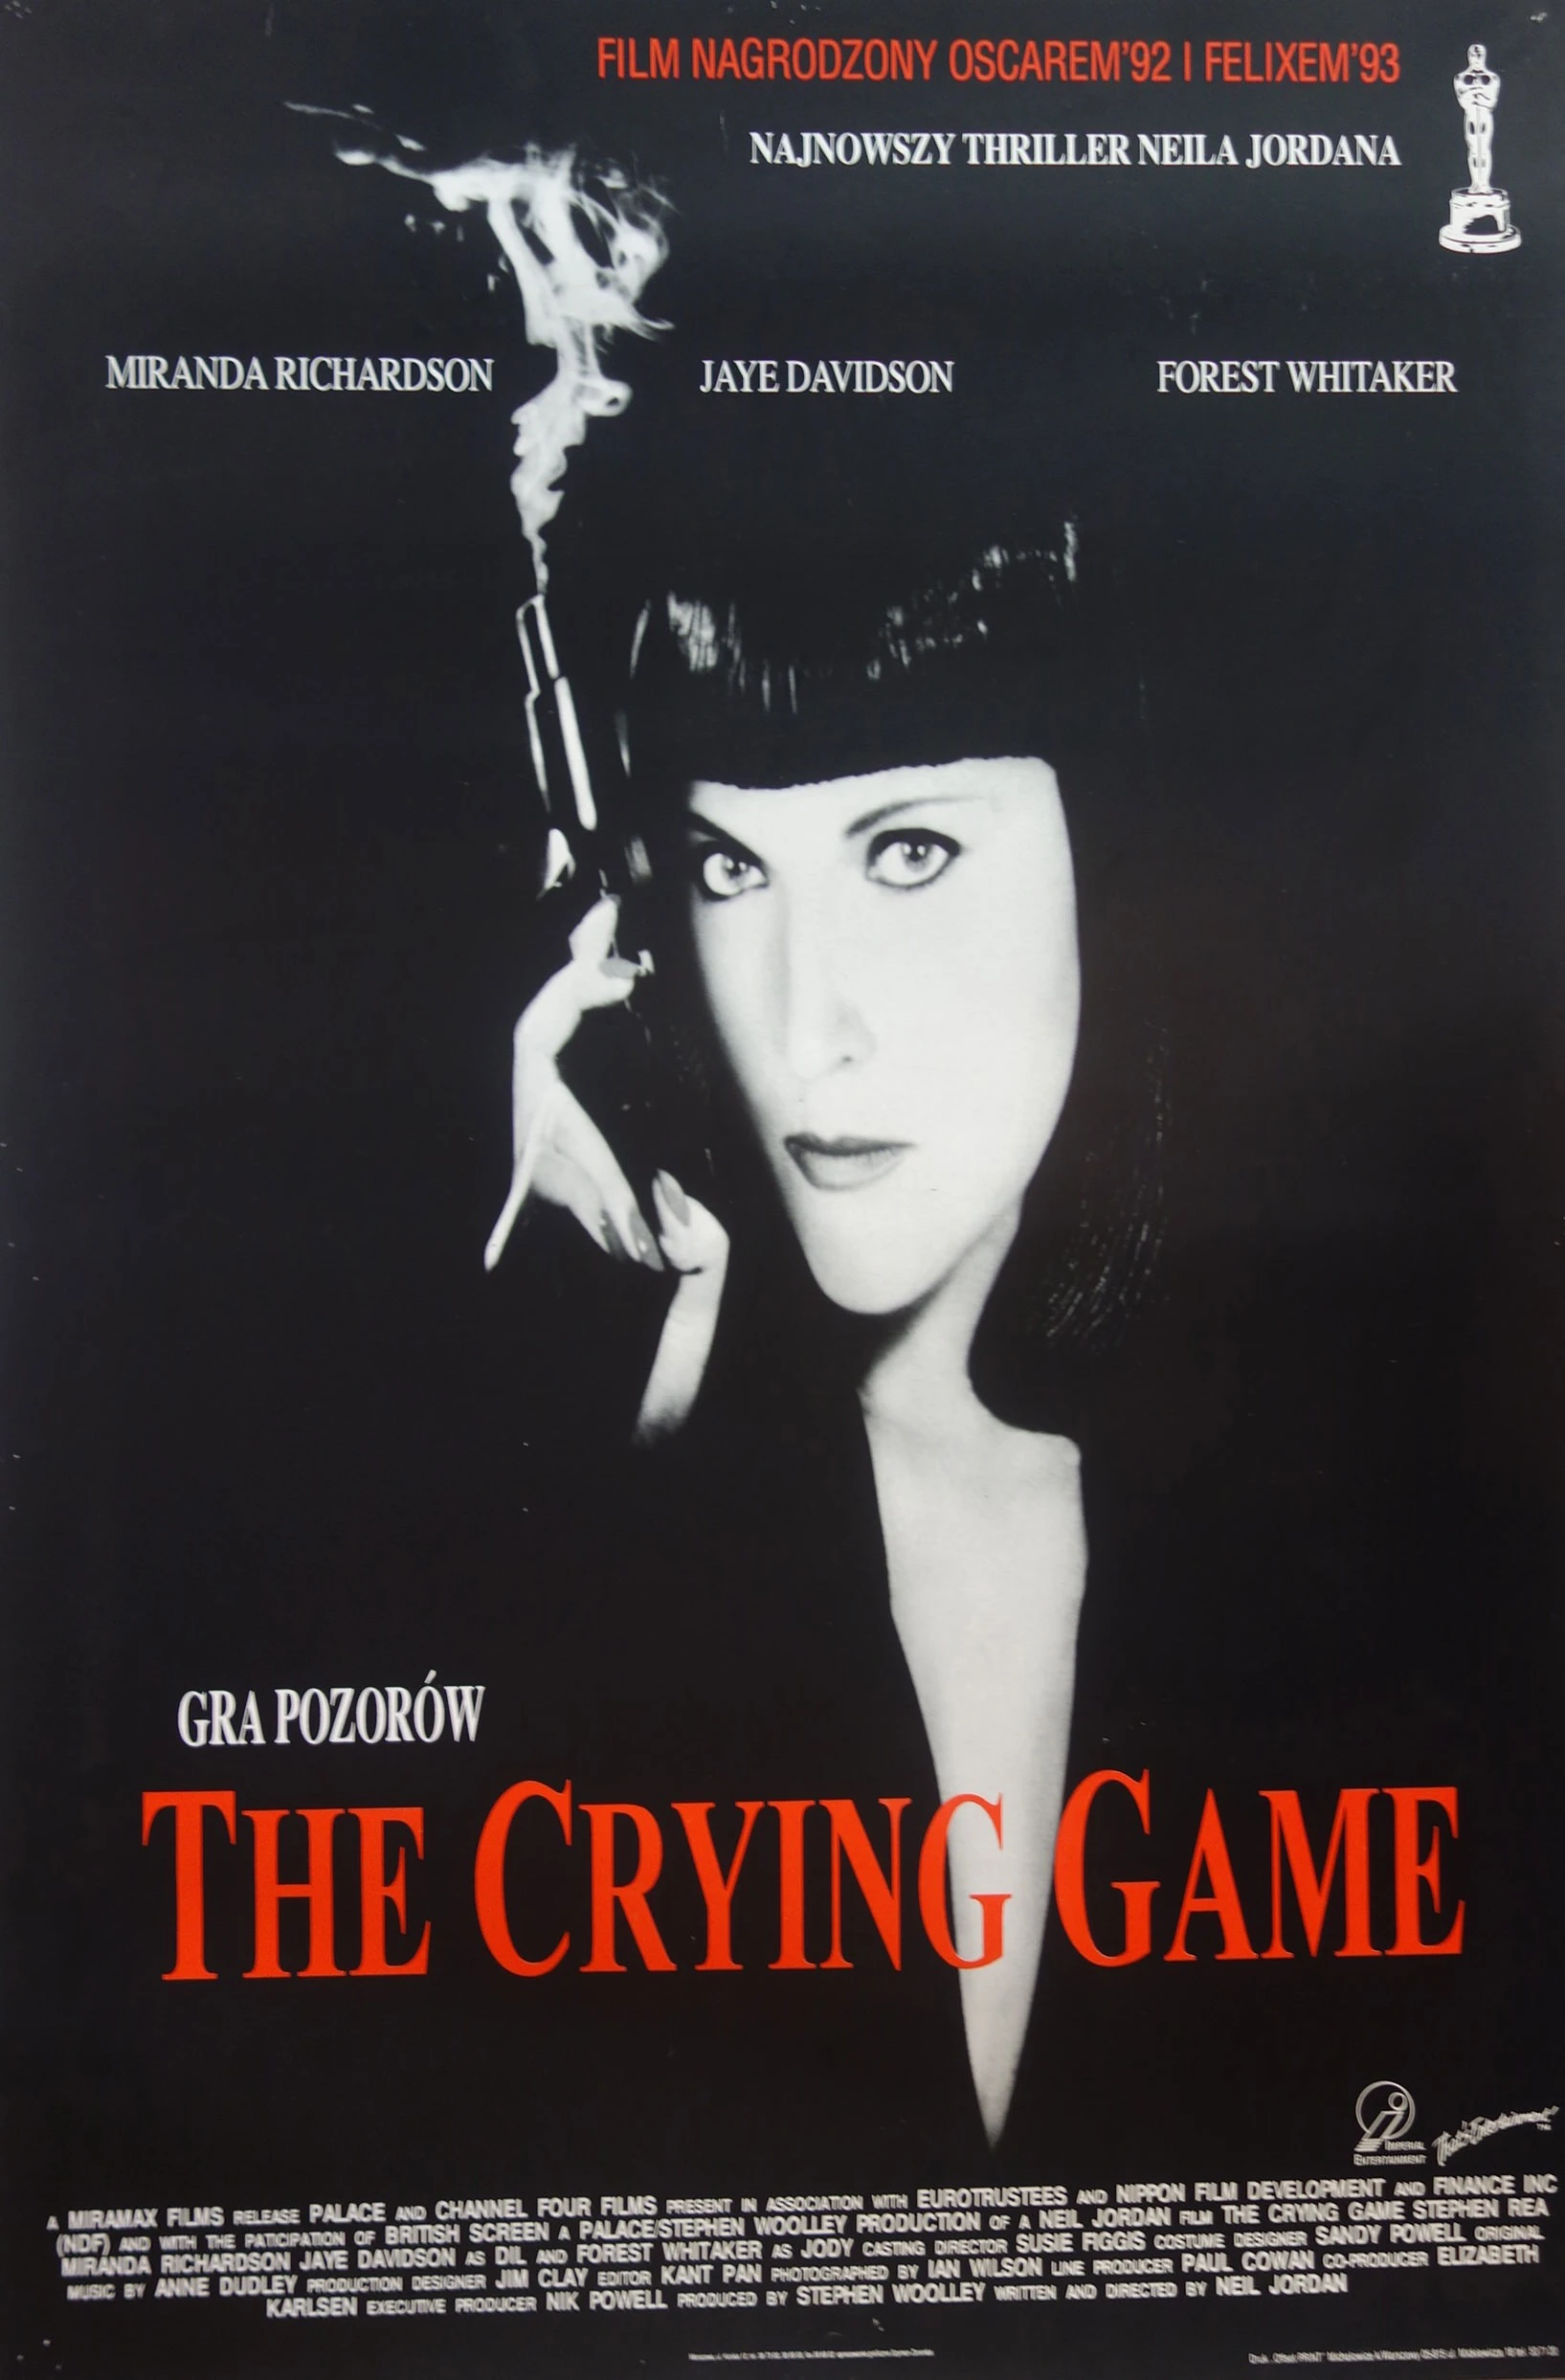 The Crying Game (1993) Main Poster